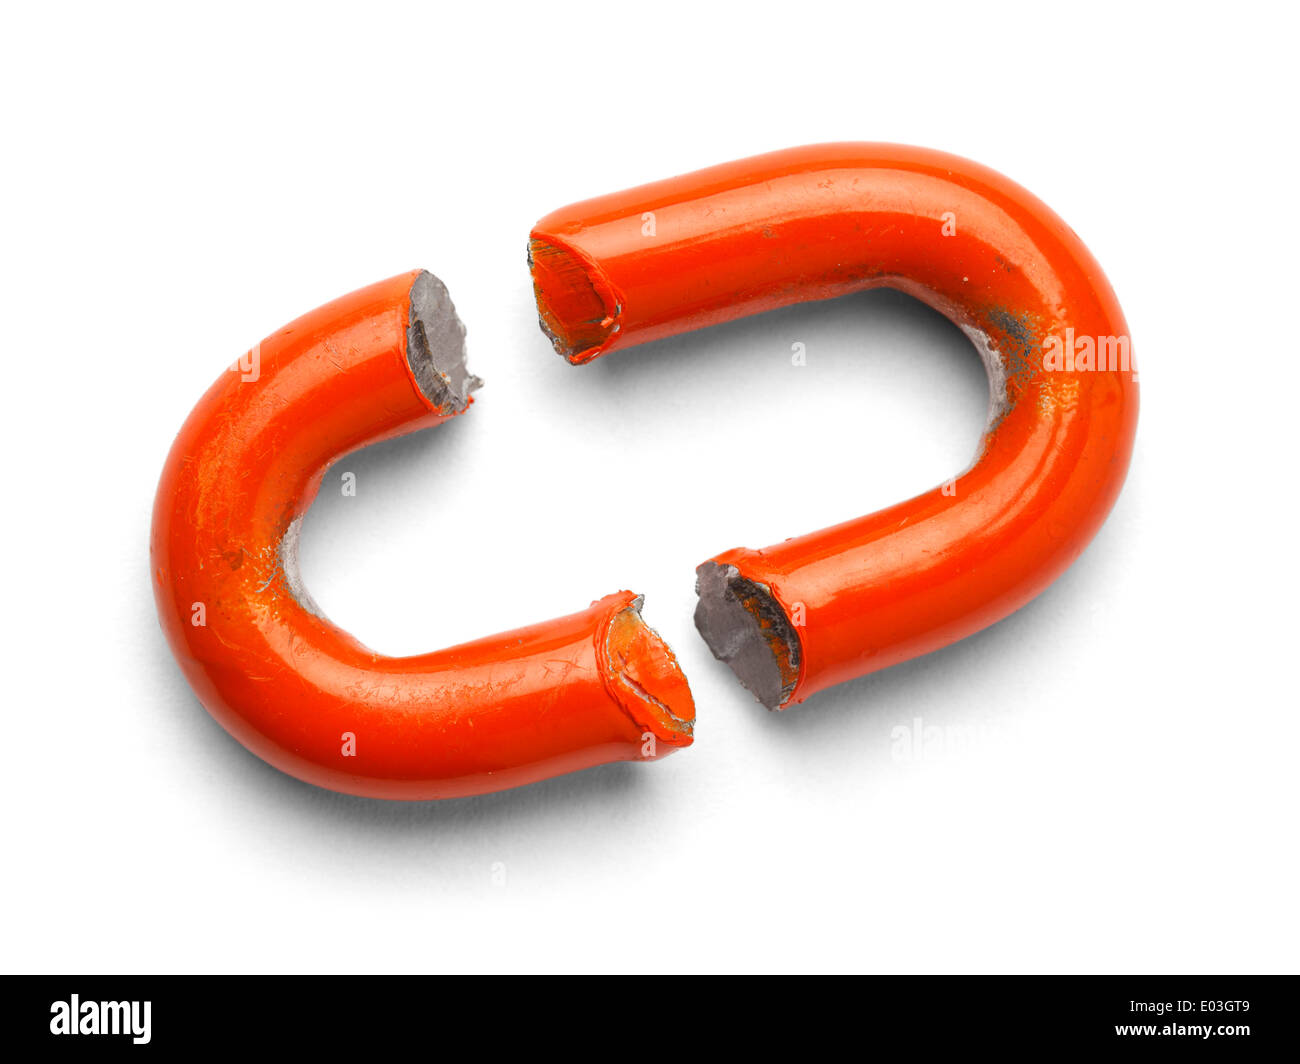 Cut and Broken Chain Link Isolate on a White Background. Stock Photo